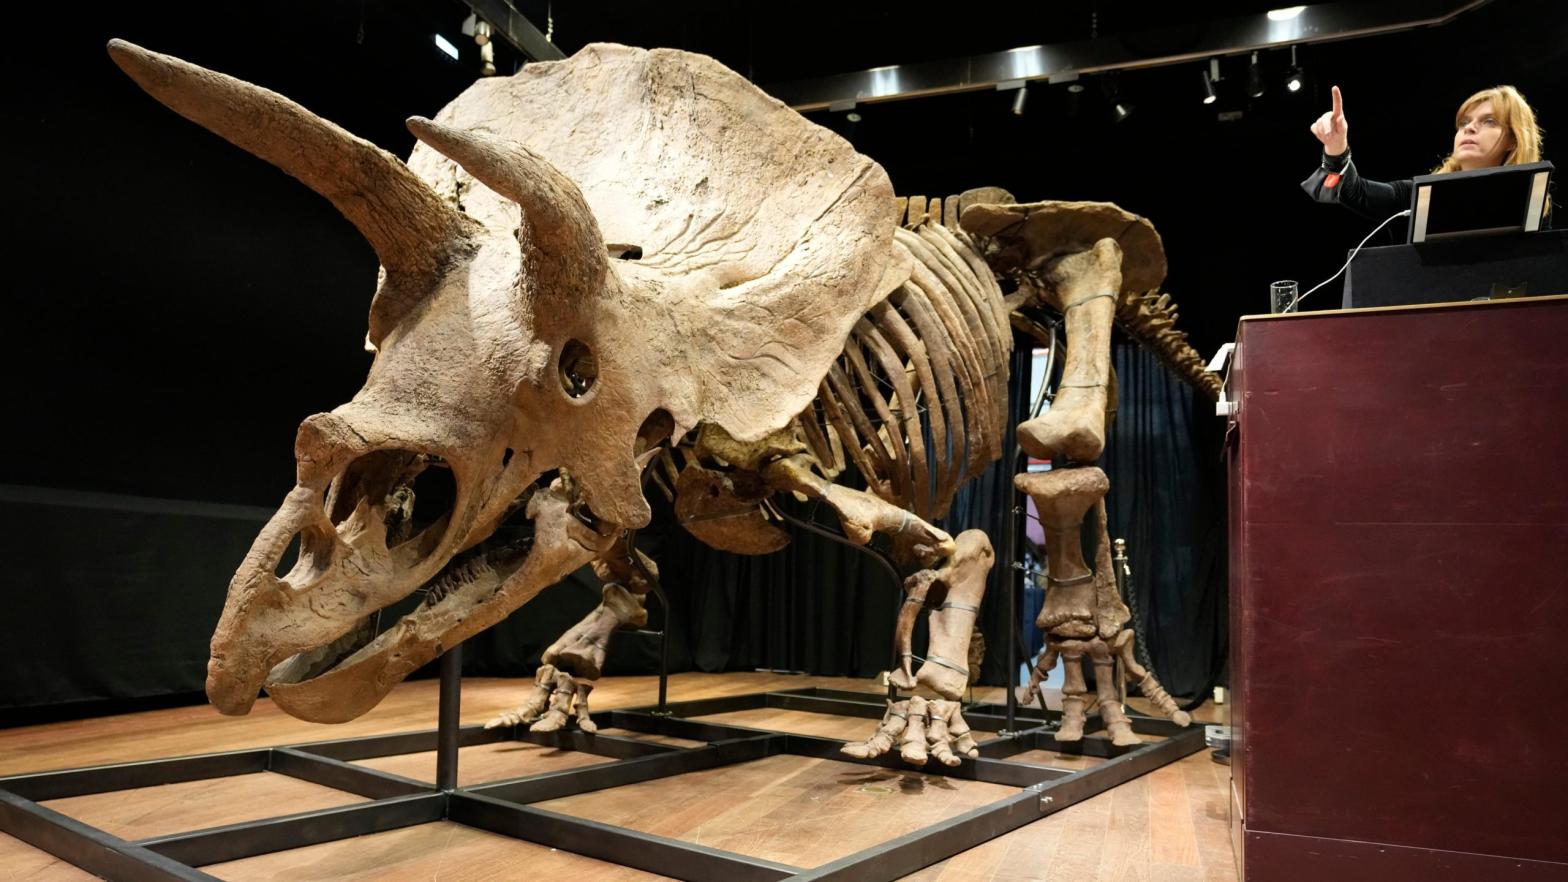 Auction officer Violette Stcherbatcheff gestures next to the world's biggest triceratops skeleton, during its auction on Oct. 21, 2021 in Paris, France. (Photo: Francois Mori, AP)